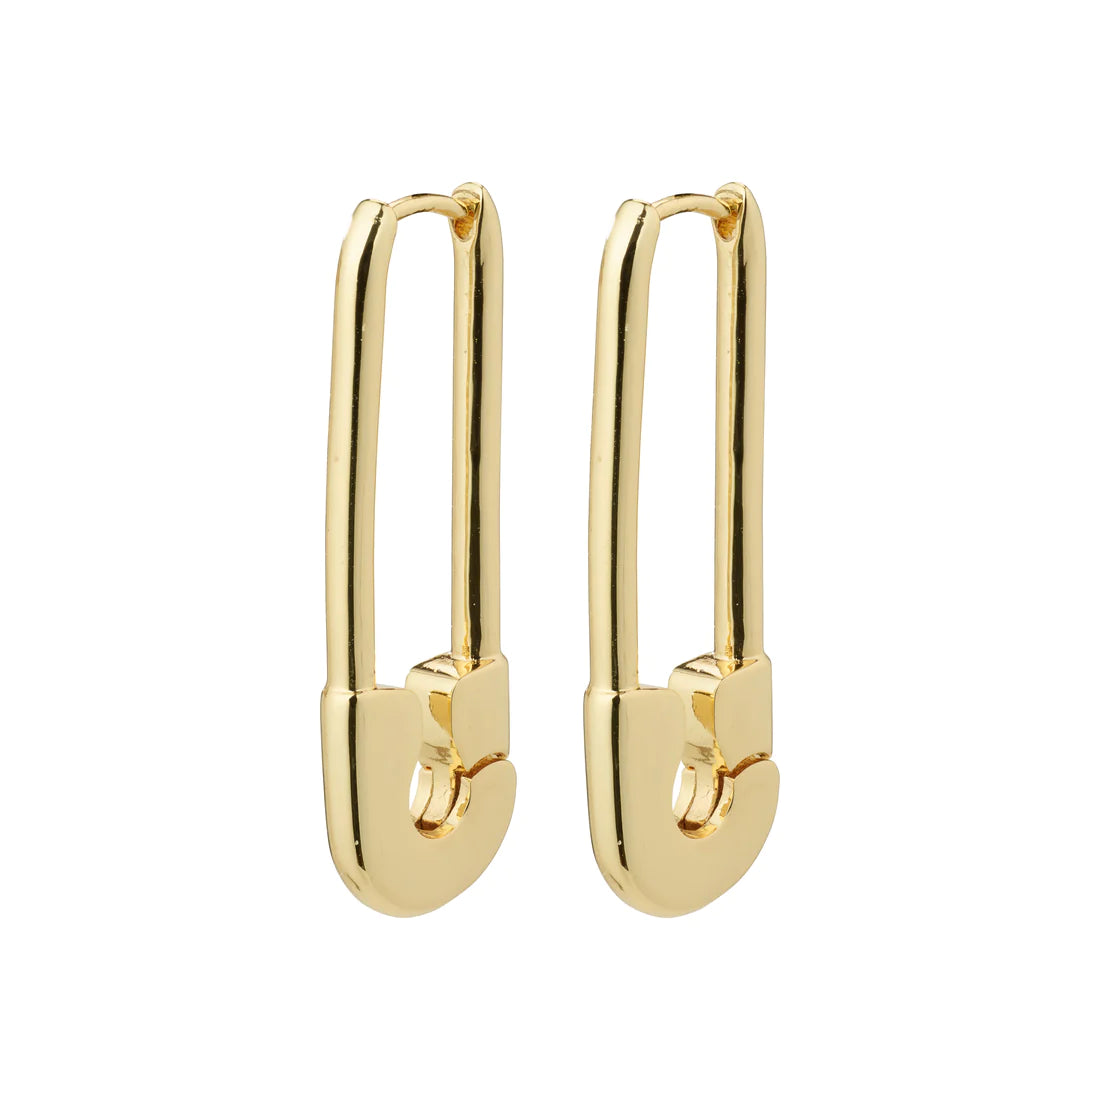 Pace Safety Pin Earrings - gold